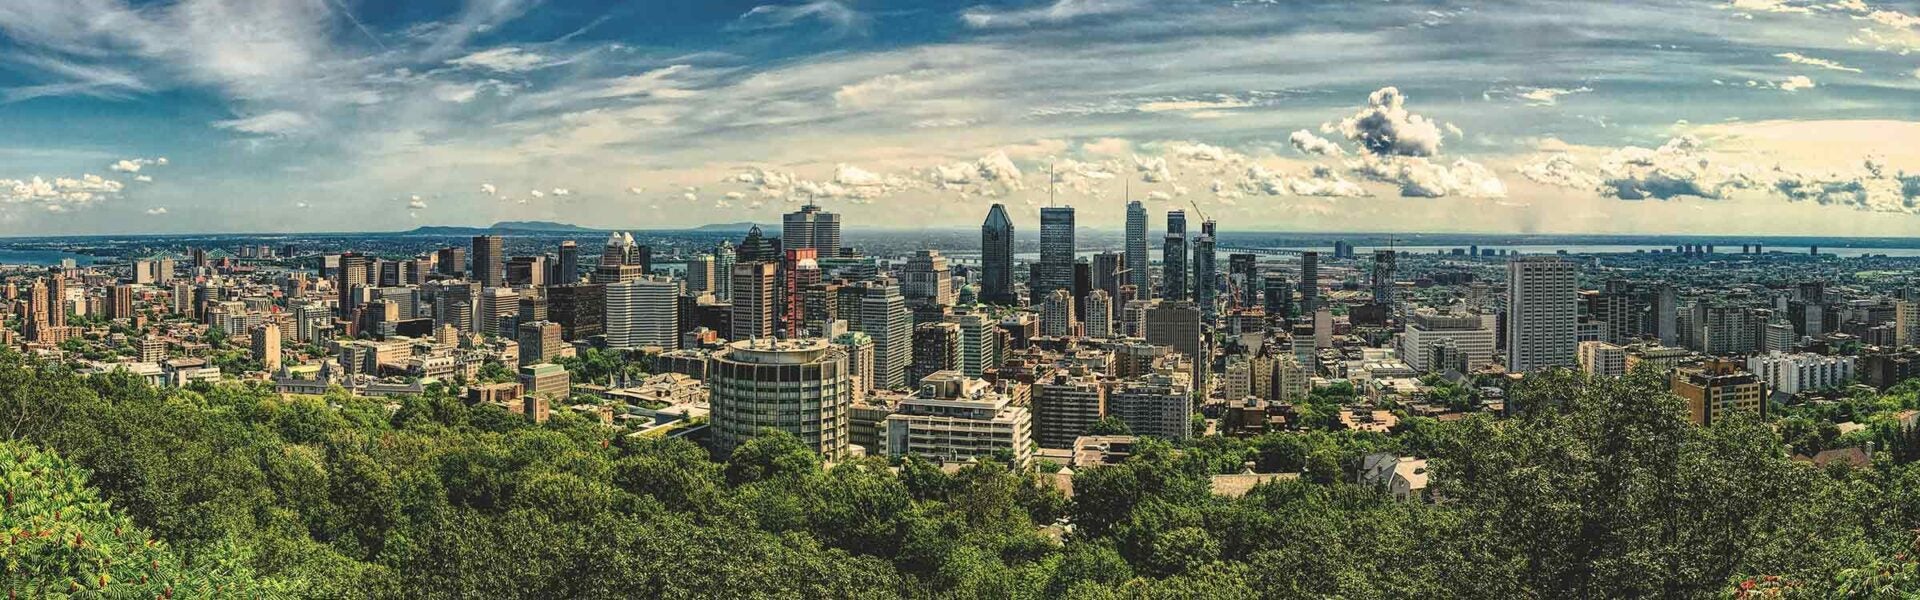 A bird's eye view of Montreal, Canada